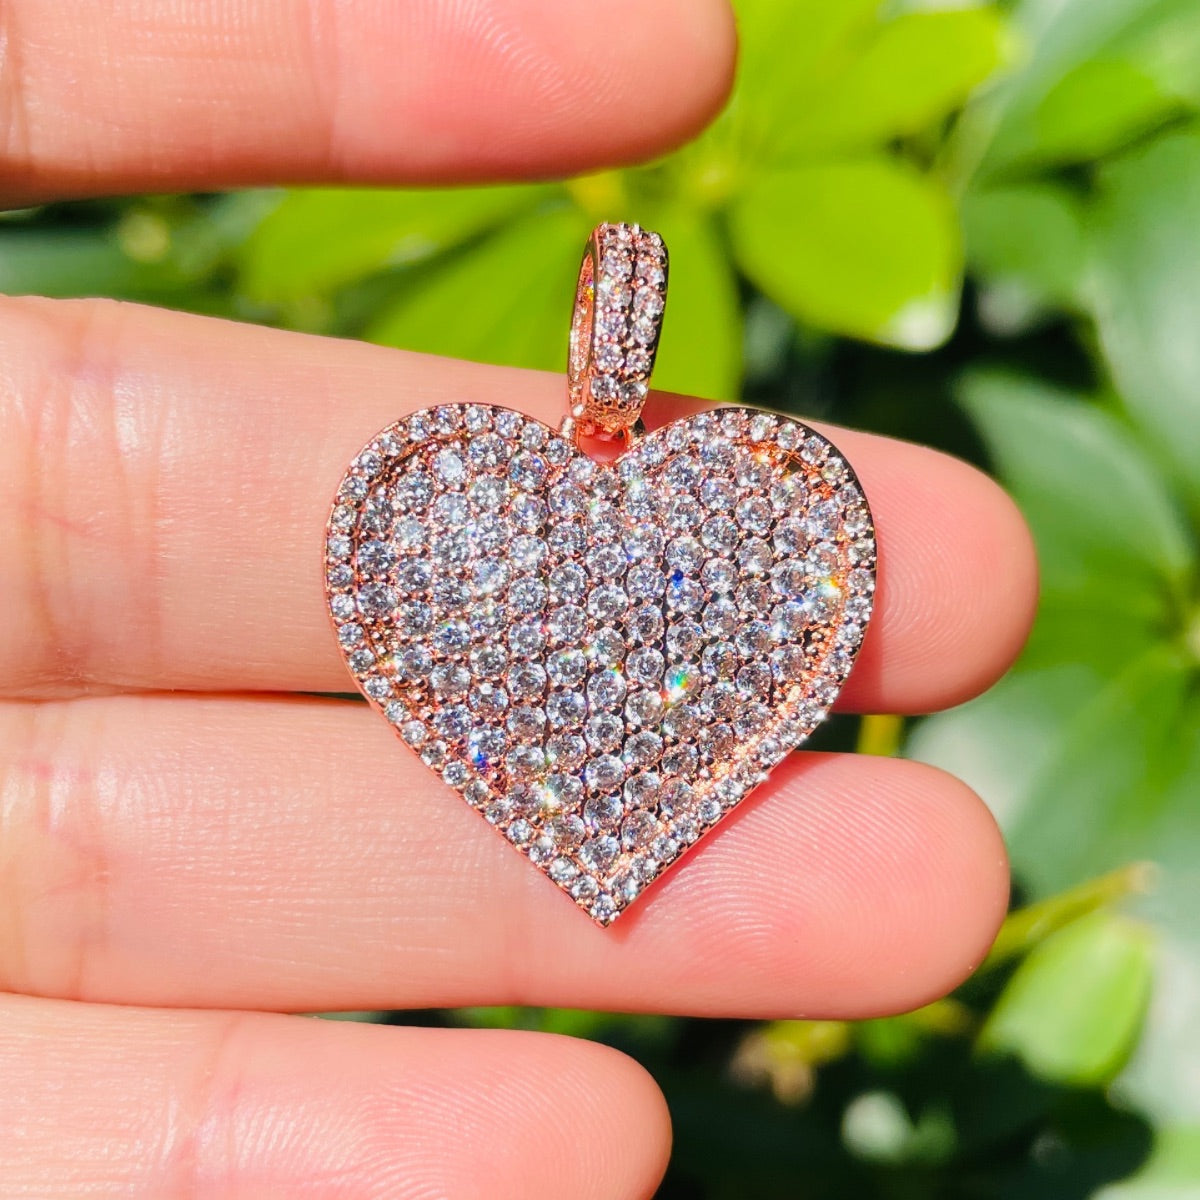 5-10pcs/lot 31.6*24.6mm CZ Paved Heart Charms-New Rose Gold CZ Paved Charms Hearts New Charms Arrivals Charms Beads Beyond